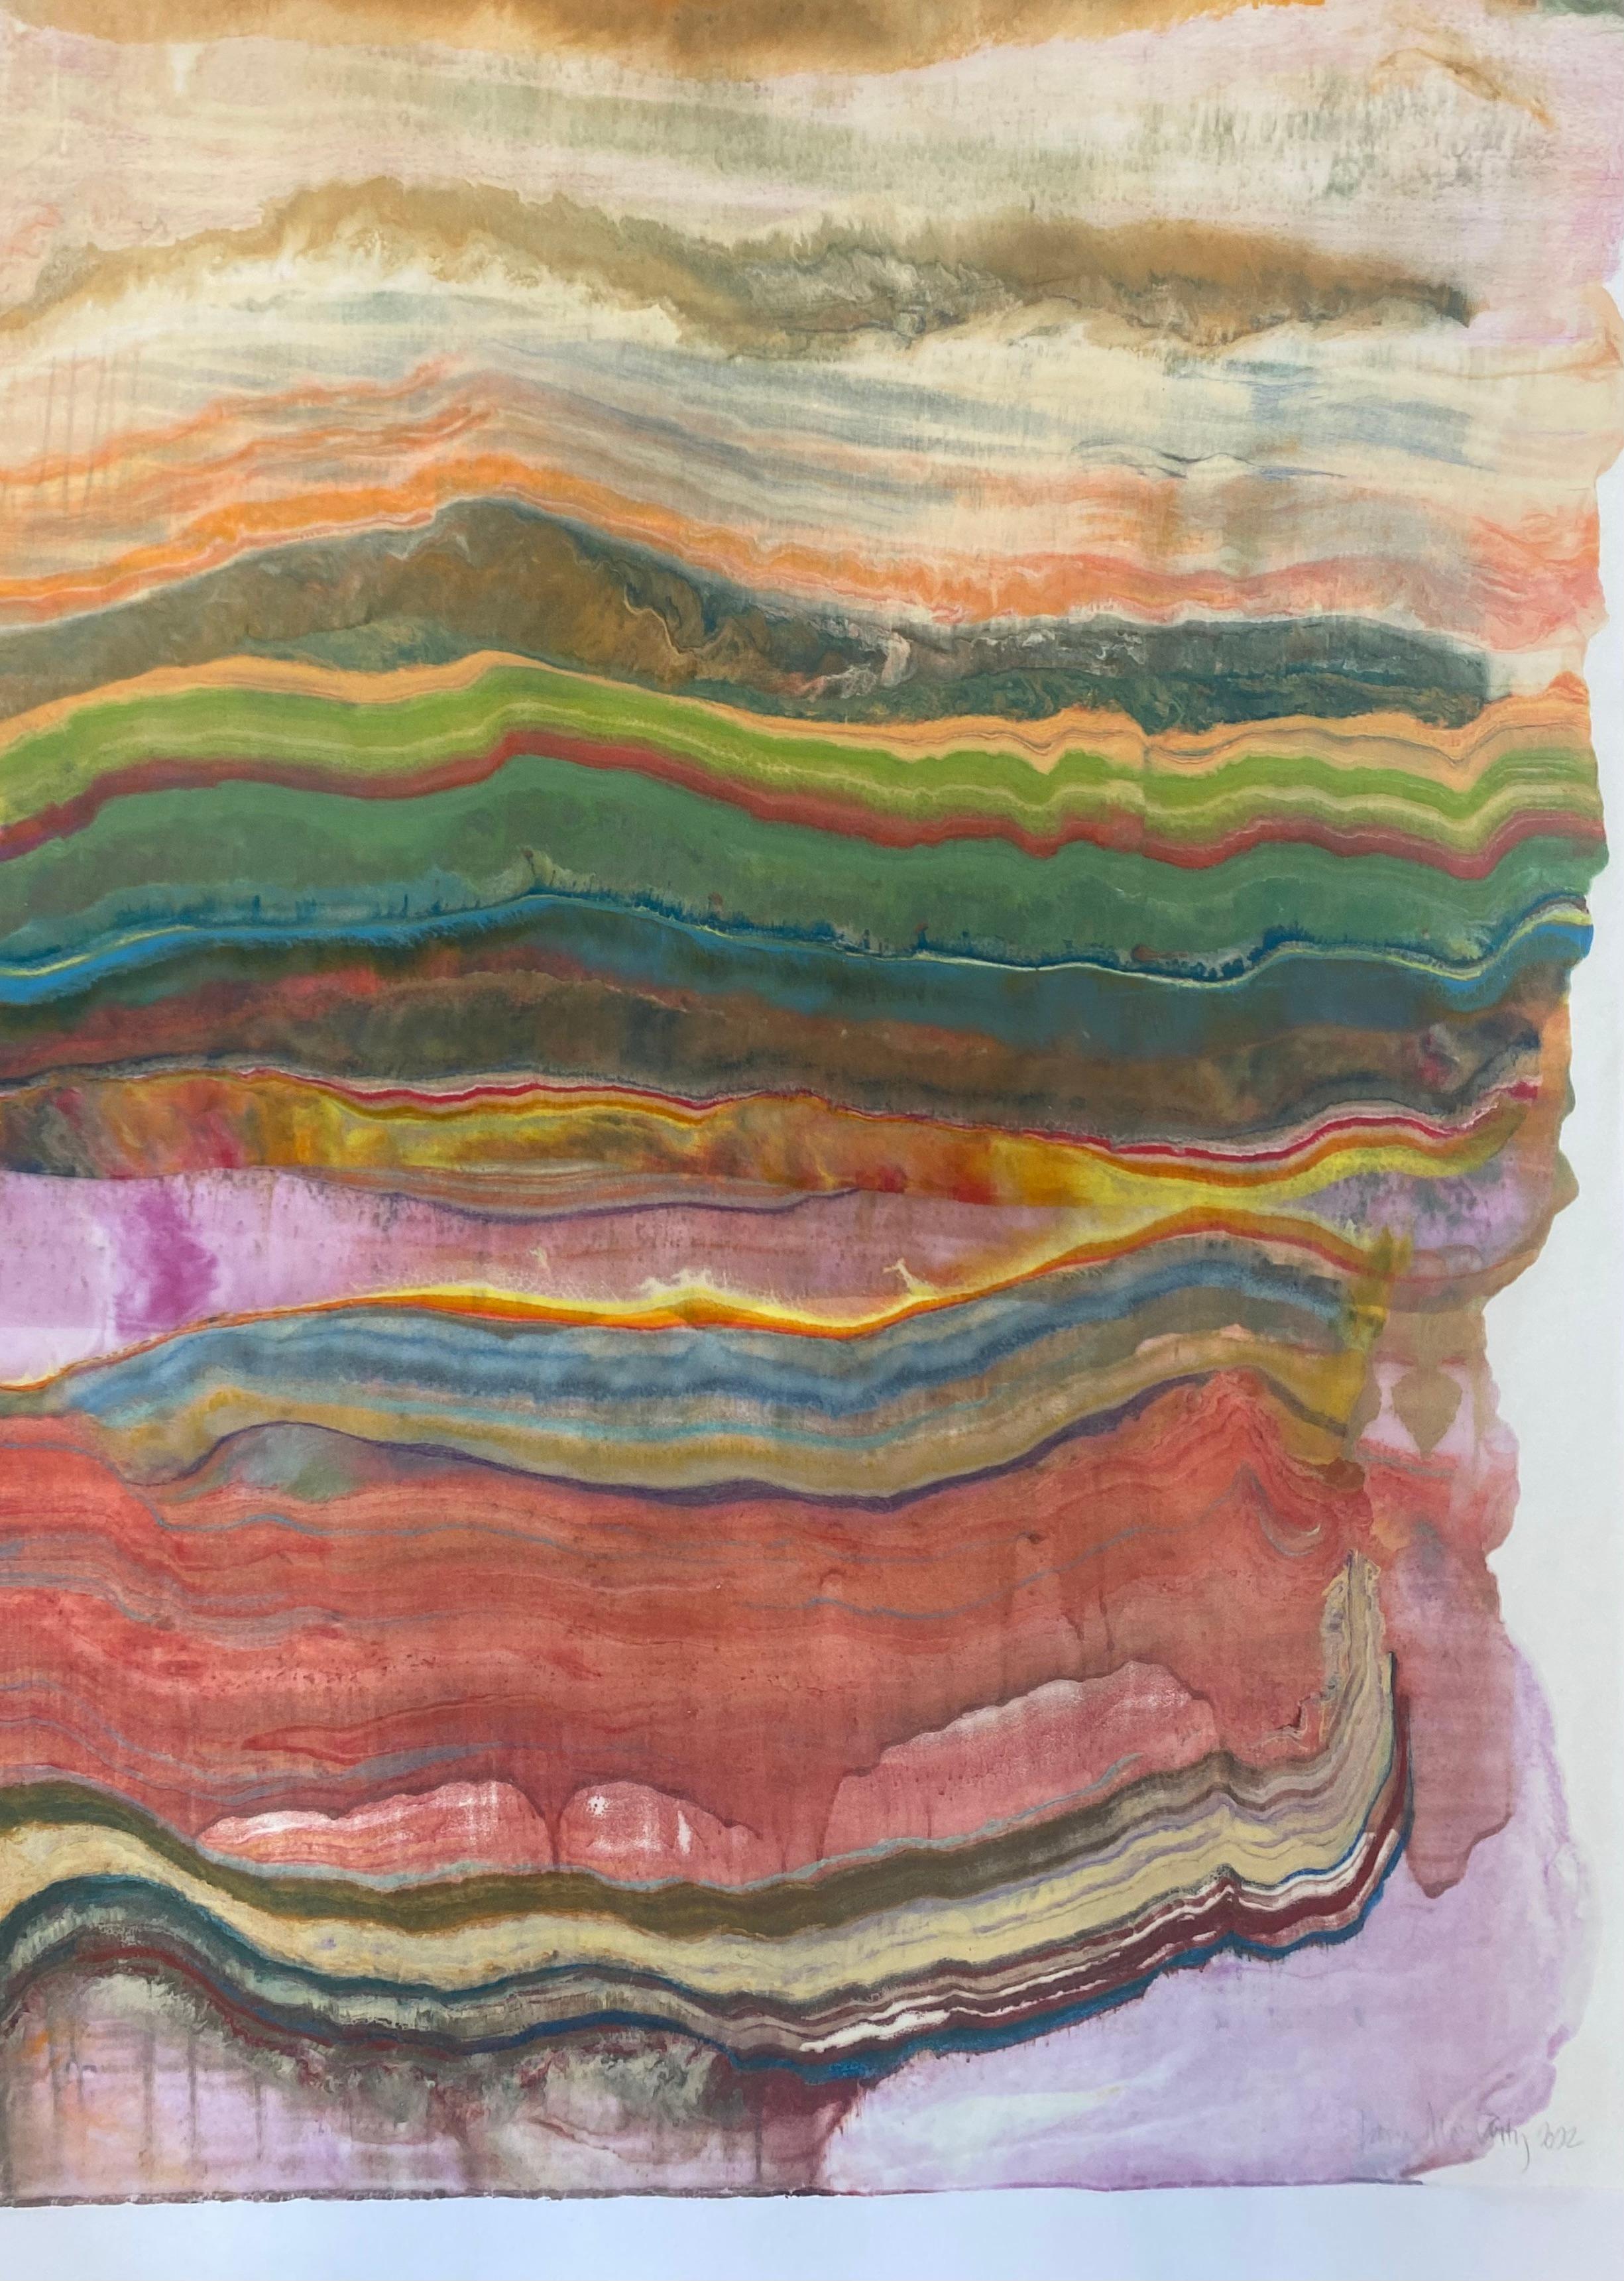 Laura Moriarty's Talking to Rocks 22 is a multicolored encaustic monotype on paper. Layers of pigmented beeswax on lightweight paper create an undulating composition suggesting layers of the earth's crust and geological formations depicted in light